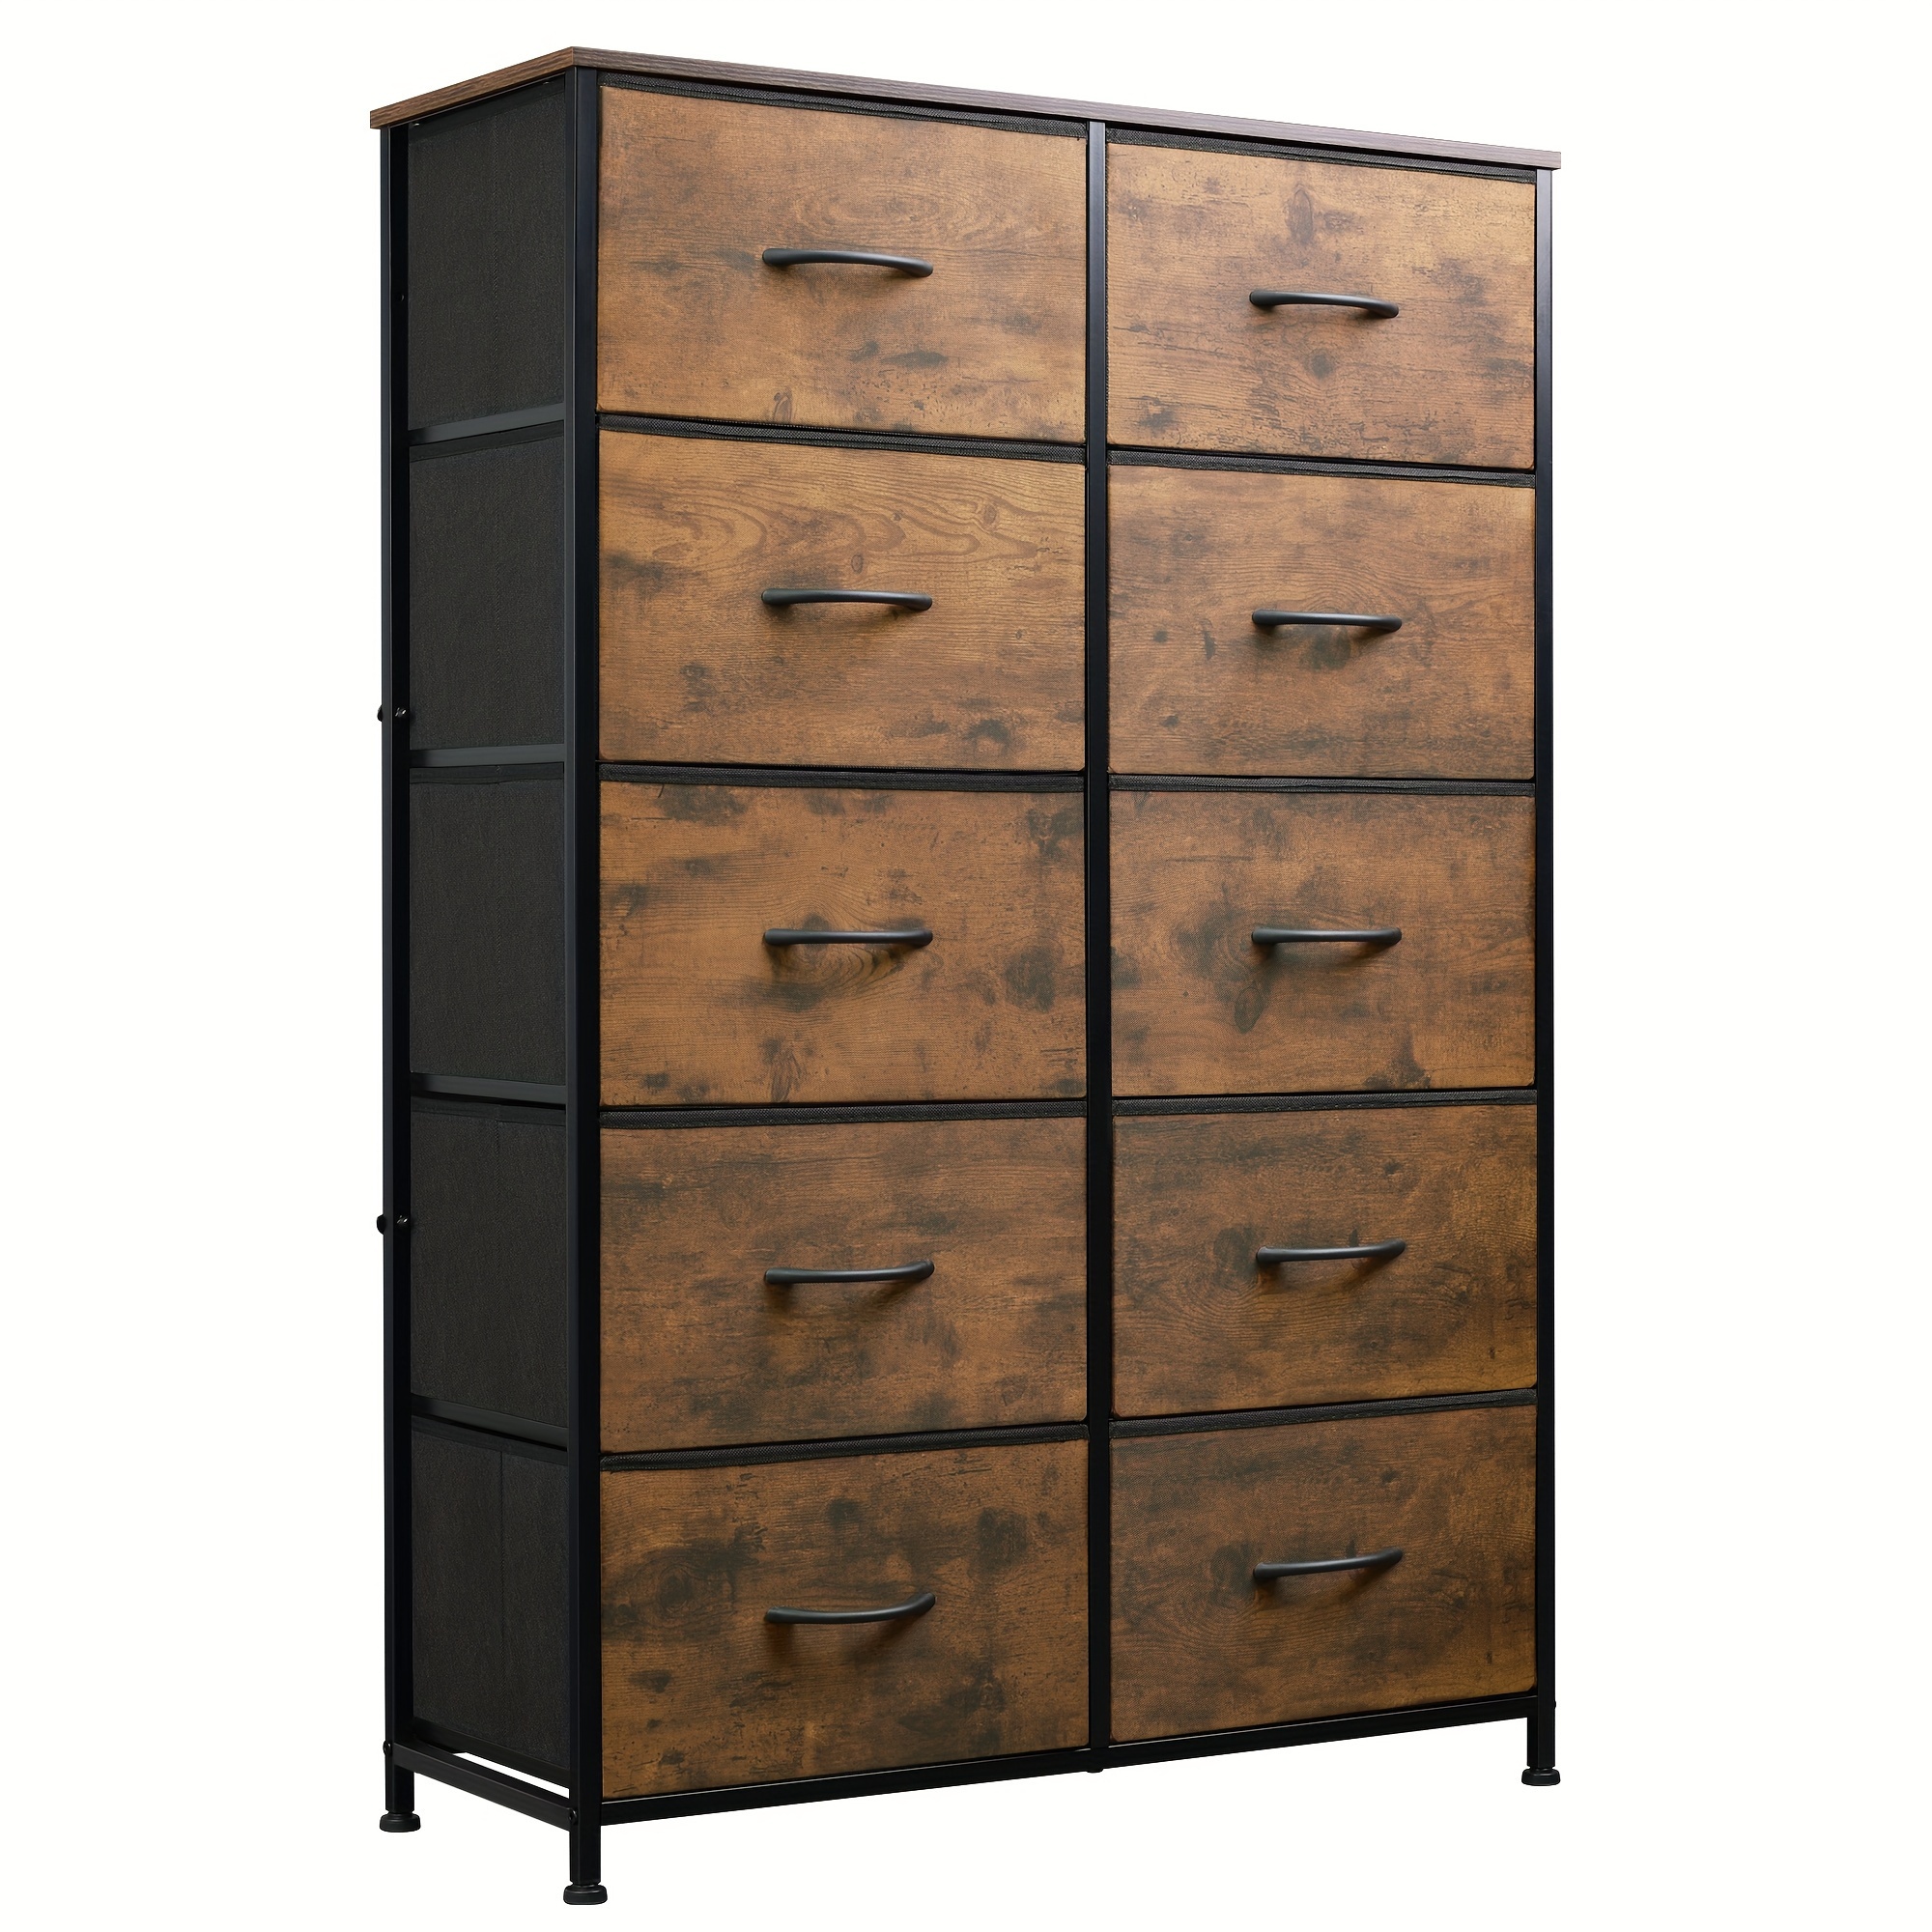 

Wlive Tall Dresser For Bedroom With 10 Drawers, Chest Of Drawers, Dressers Bedroom Furniture, Storage Organizer Unit With Fabric Bins For Closet, Hallway, Living Room, Rustic Brown Wood Grain Print